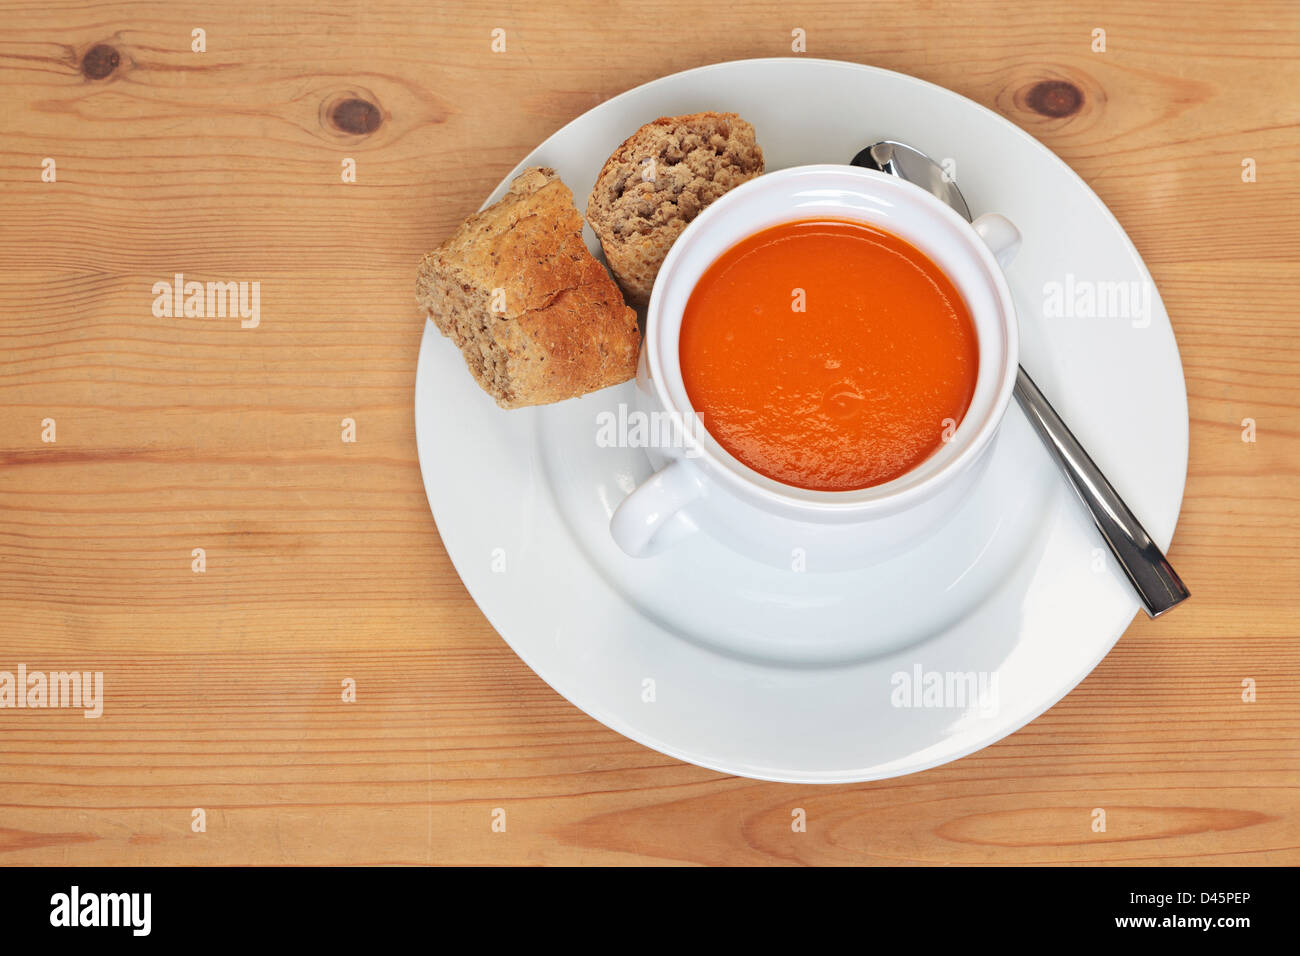 Bowl of hot tomatoe soup with fresh brown granary bread on a wooden table. Stock Photo